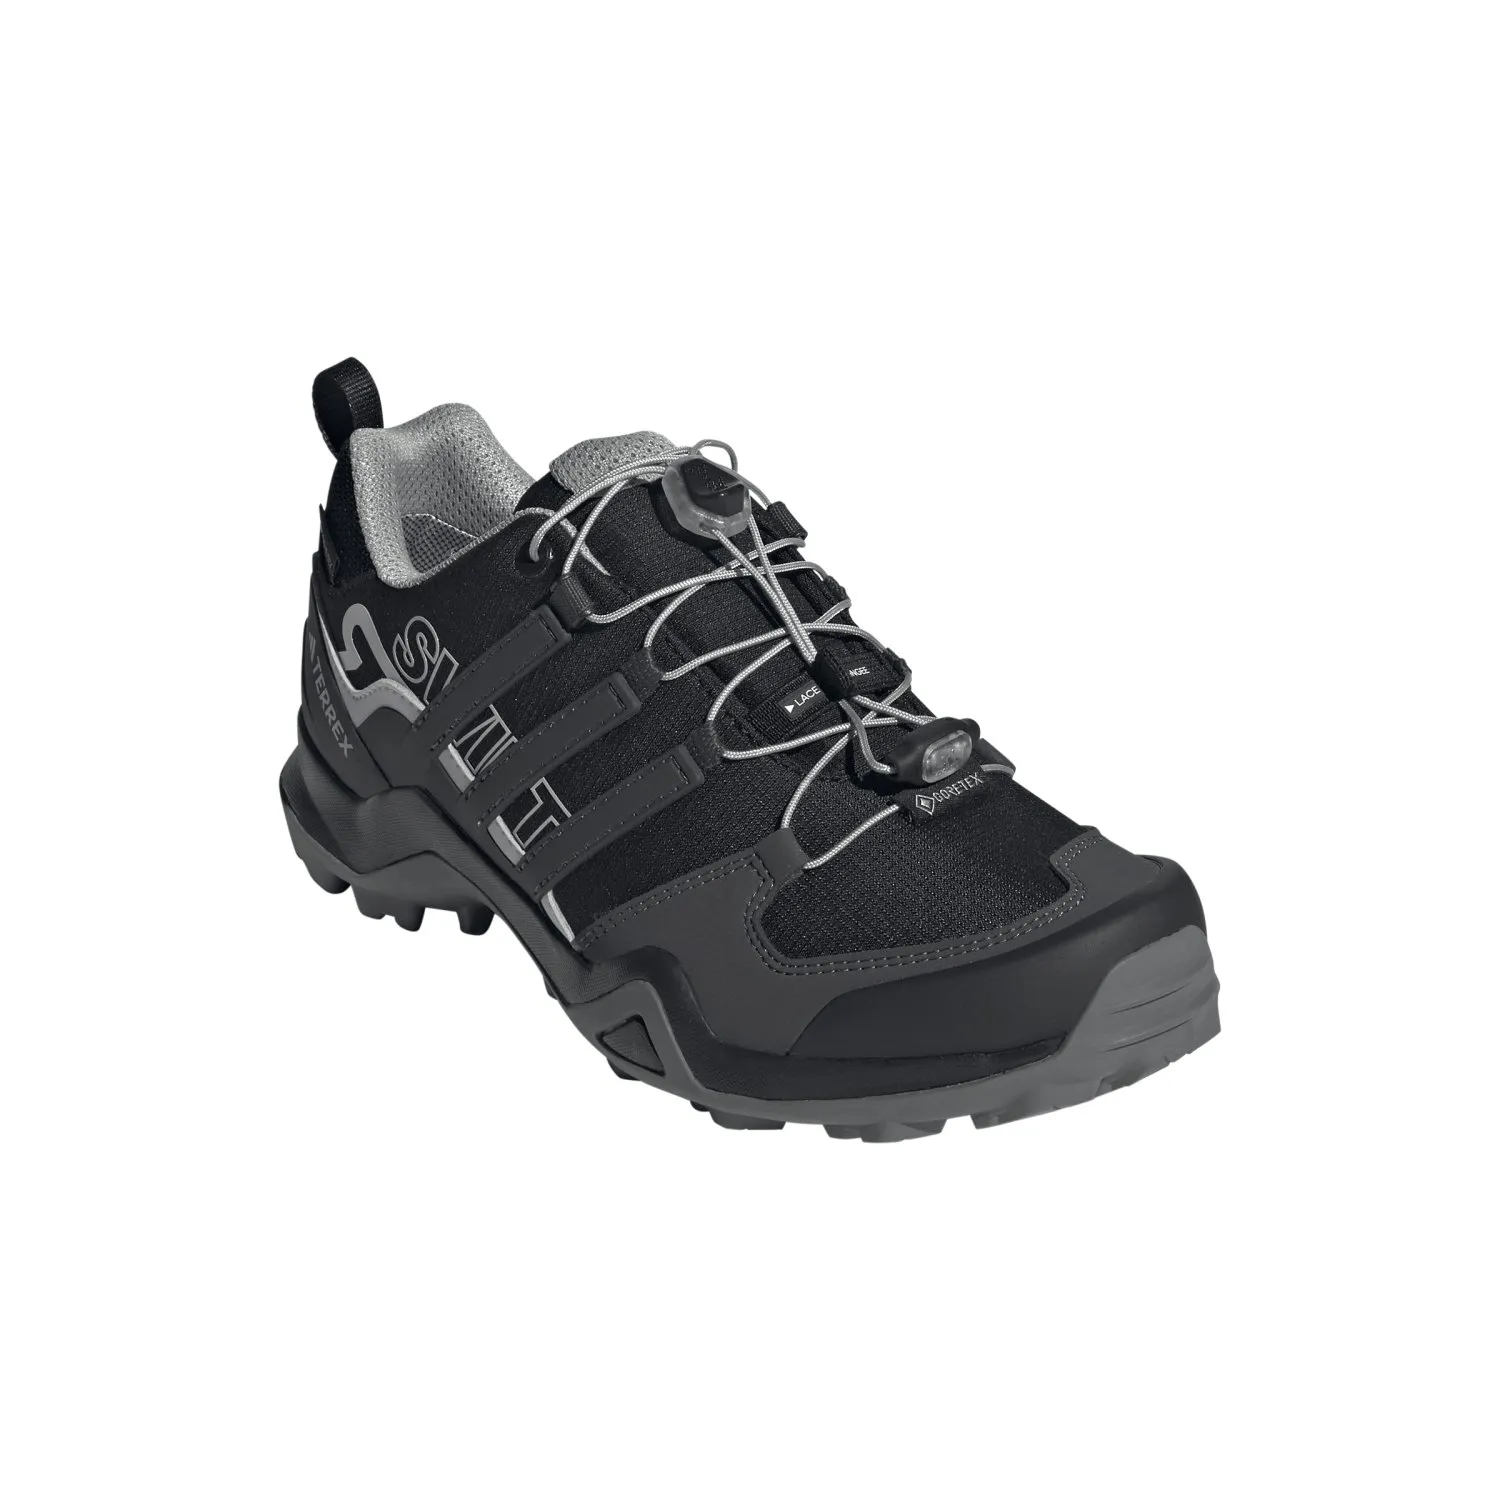 IF7634_6_FOOTWEAR_Photography_Front Lateral Top View_white.jpg